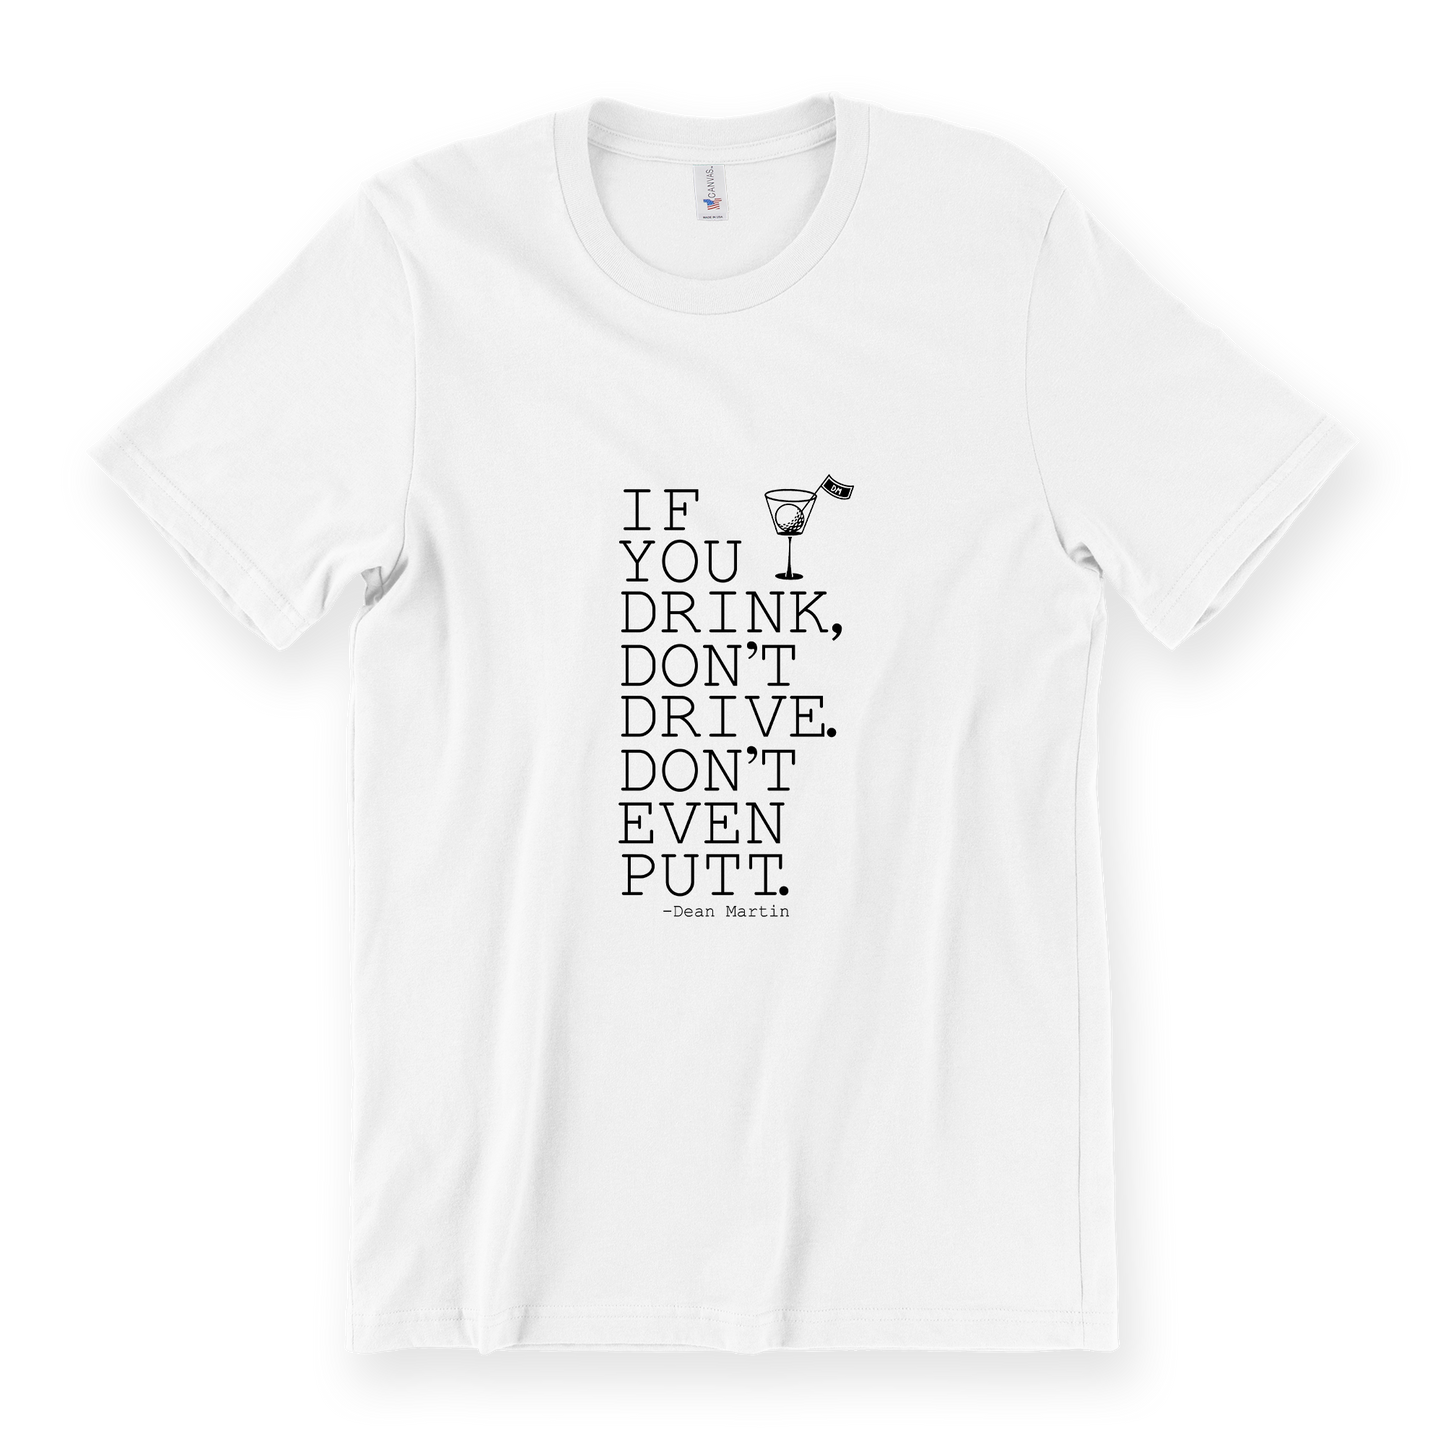 Putting Quote Tee - White